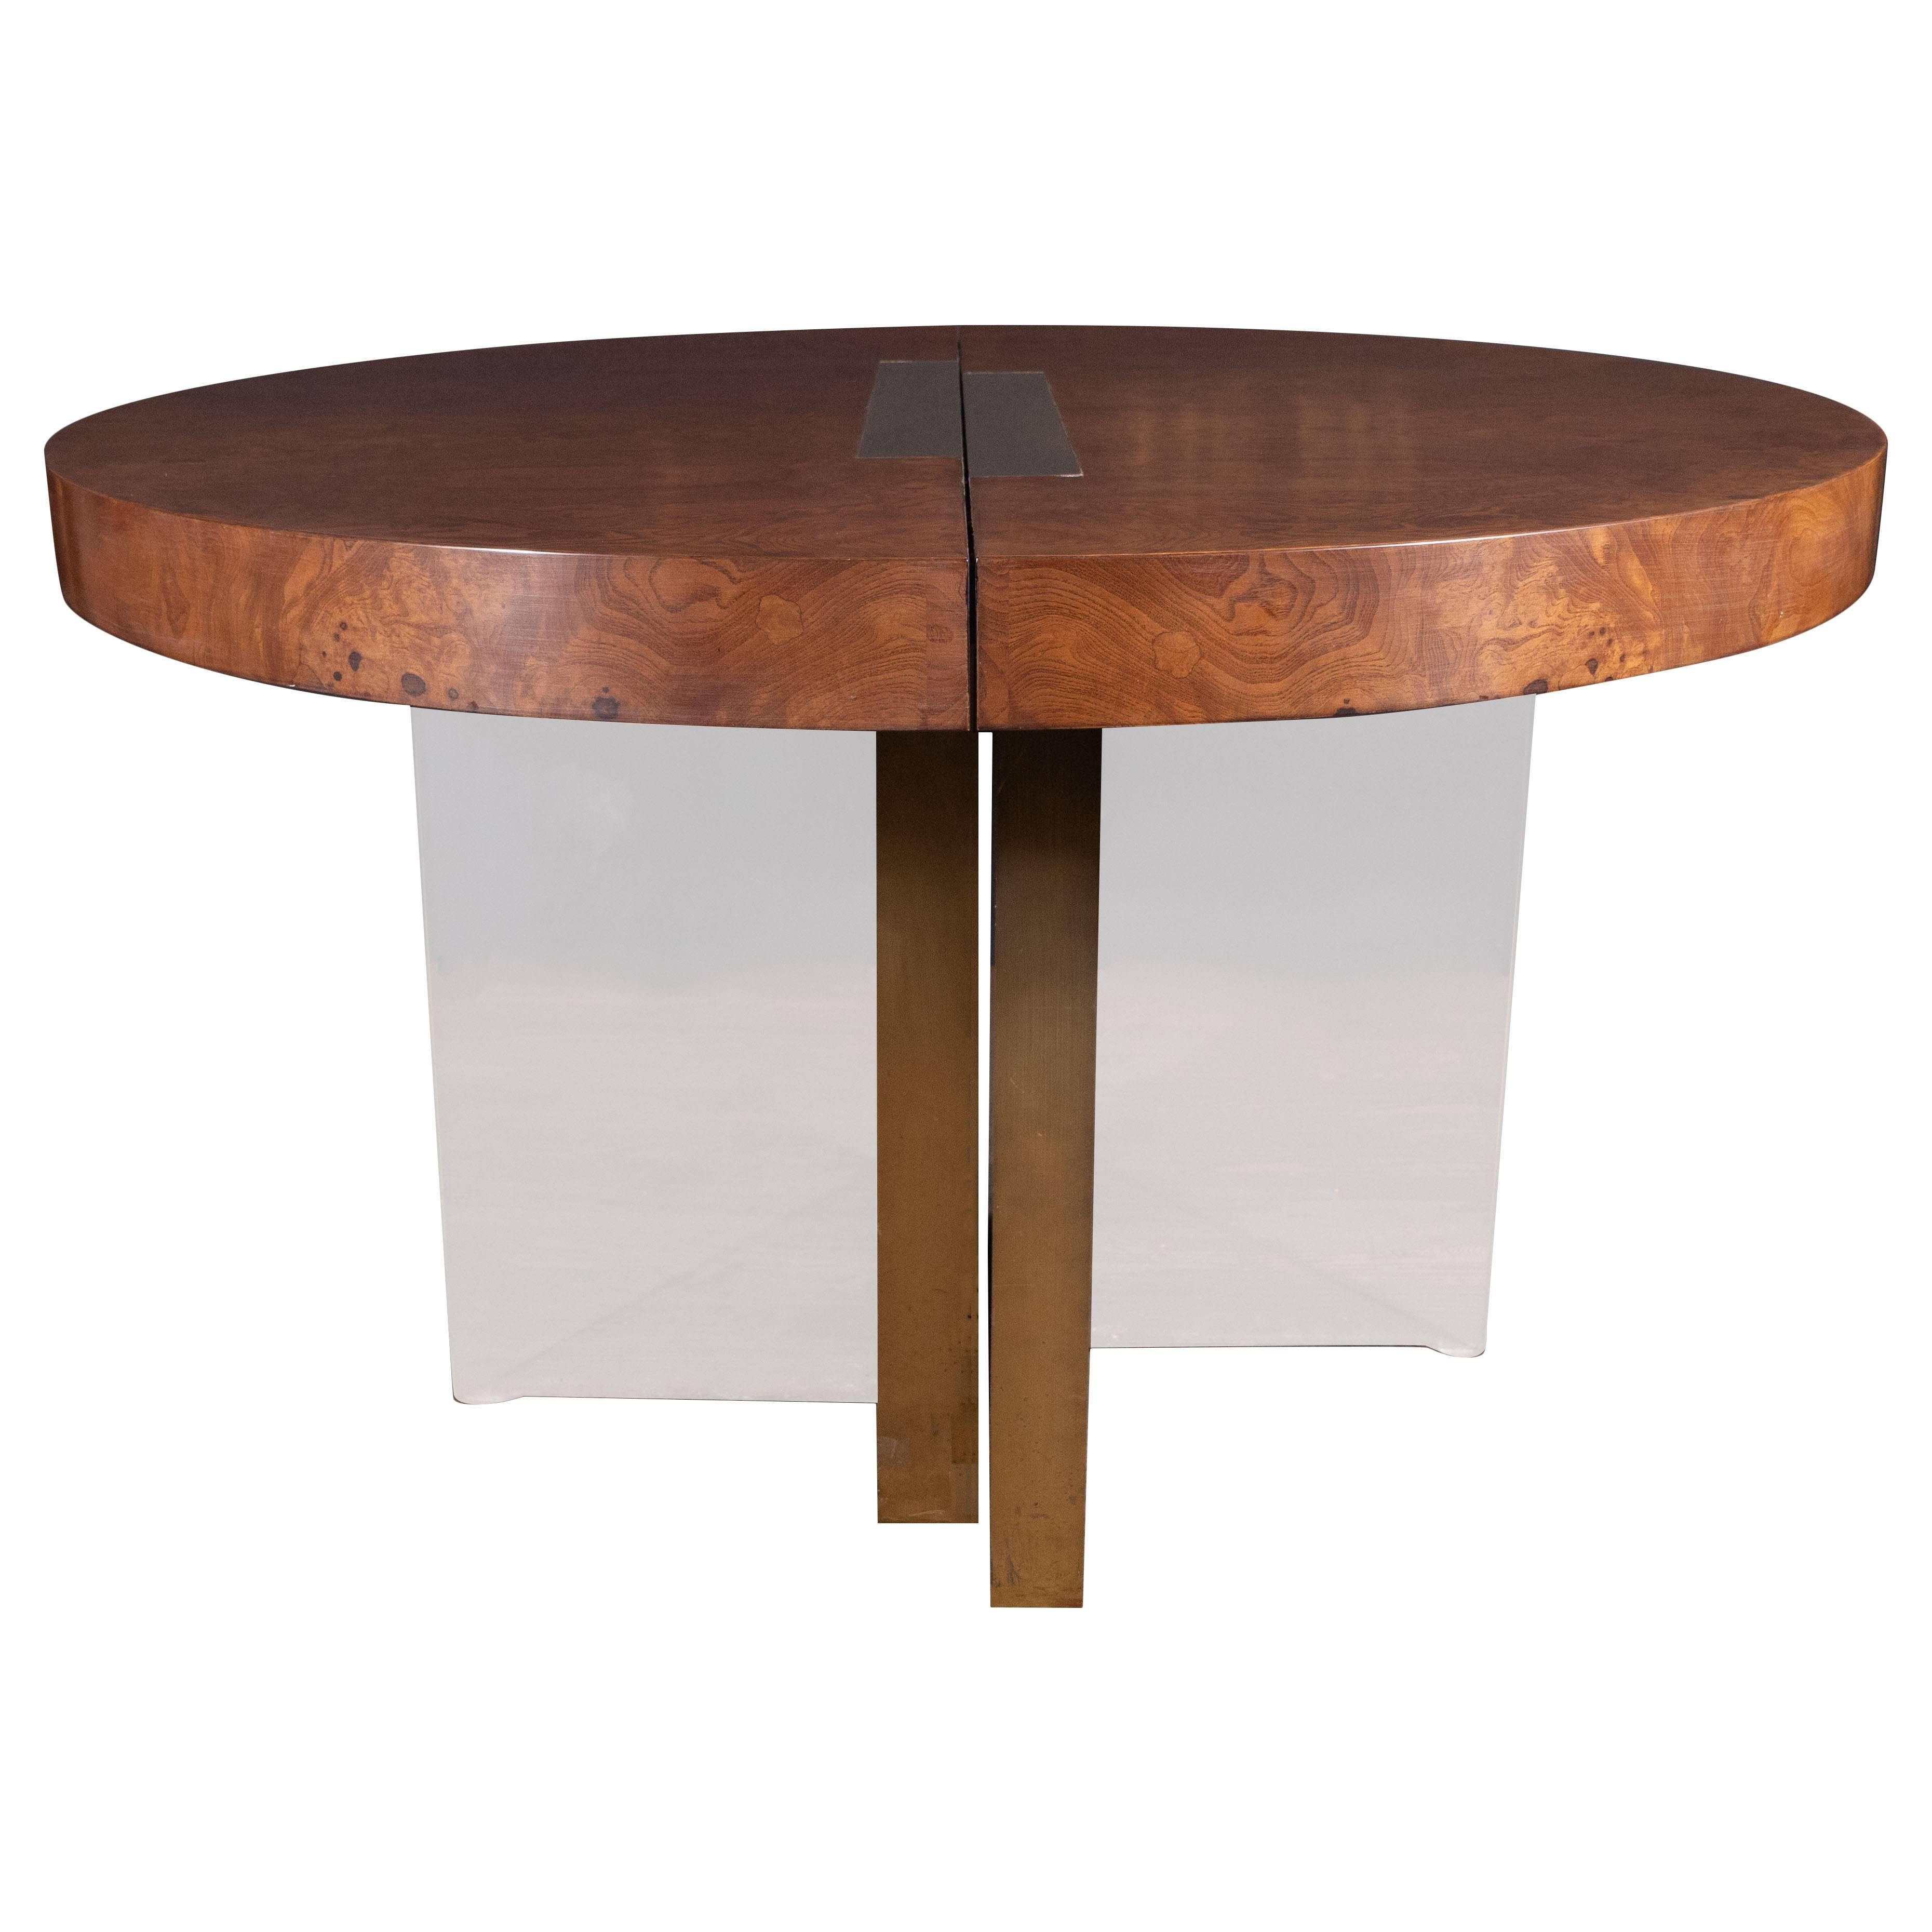 This stunning dining/center table was realized by the fabled American designer, Vladimir Kagan and handcrafted in the United States, circa 1976. It offers a circular burled olive ash top with two inlaid offset rectangular polished brass inserts,